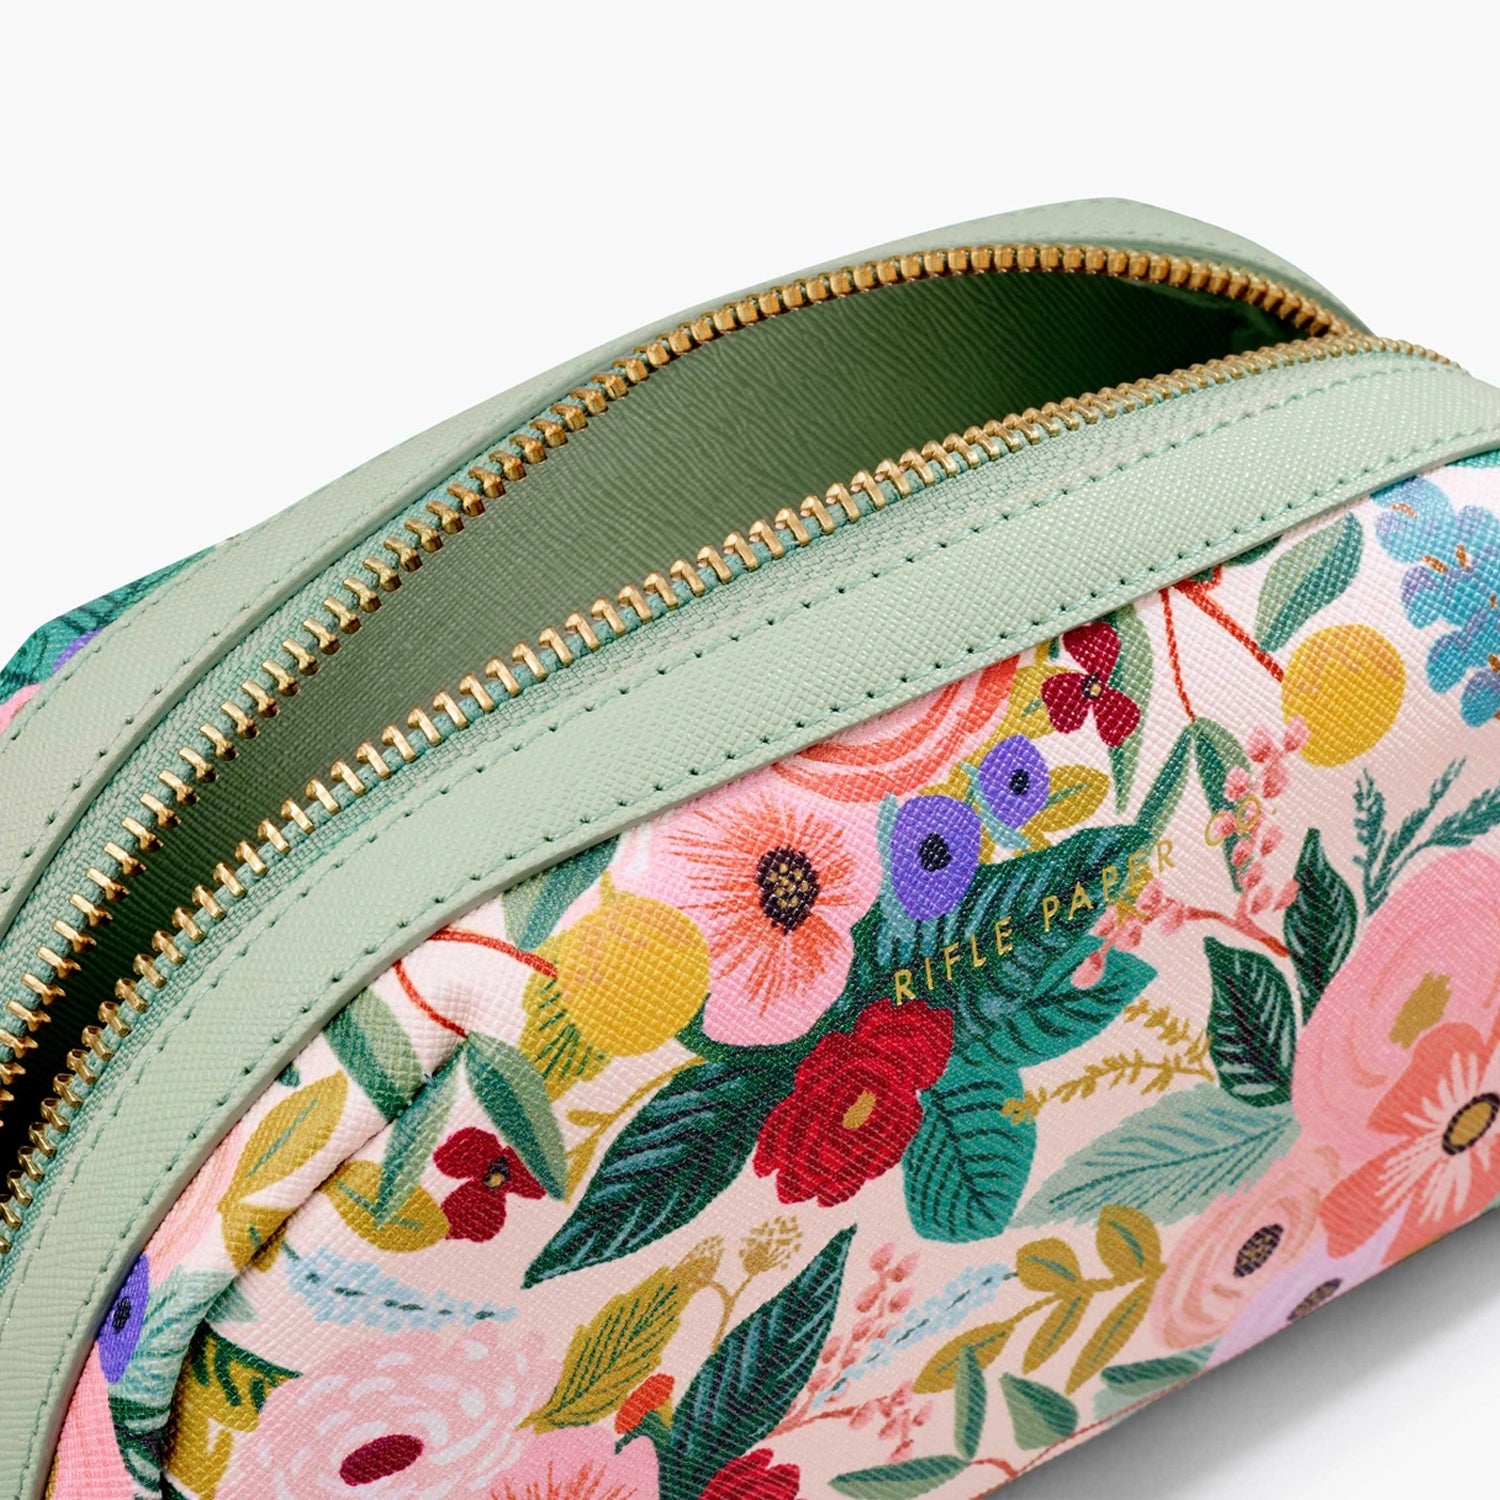 Garden Party Small Cosmetic Pouch